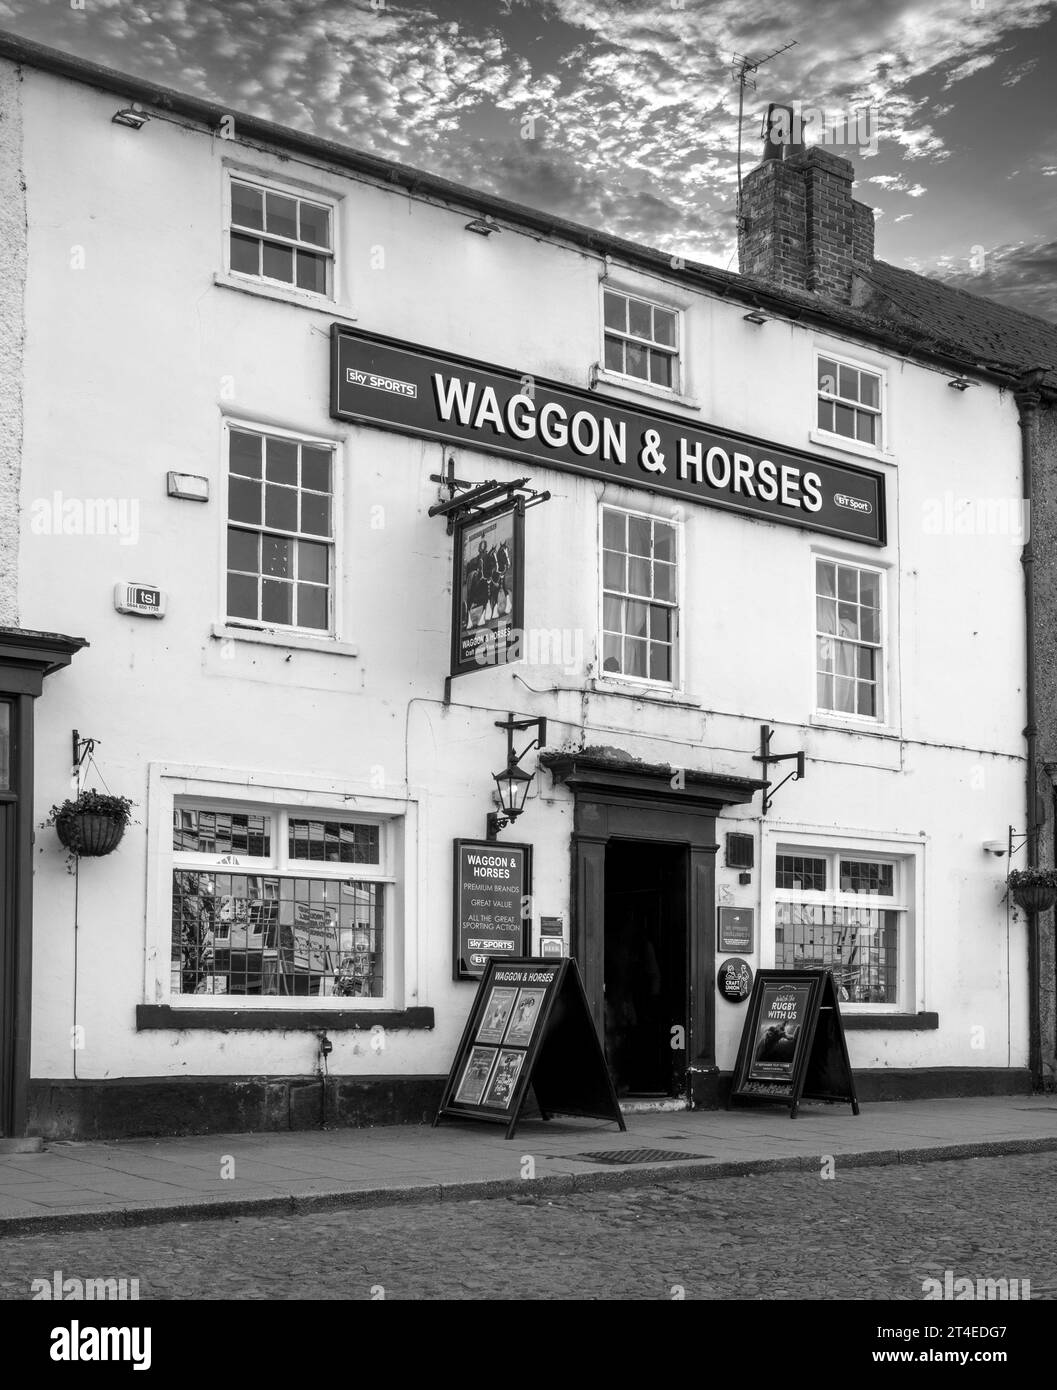 The Waggon and Horses public House, Market place, Bedale, North Yorkshire, Angleterre, ROYAUME-UNI Banque D'Images